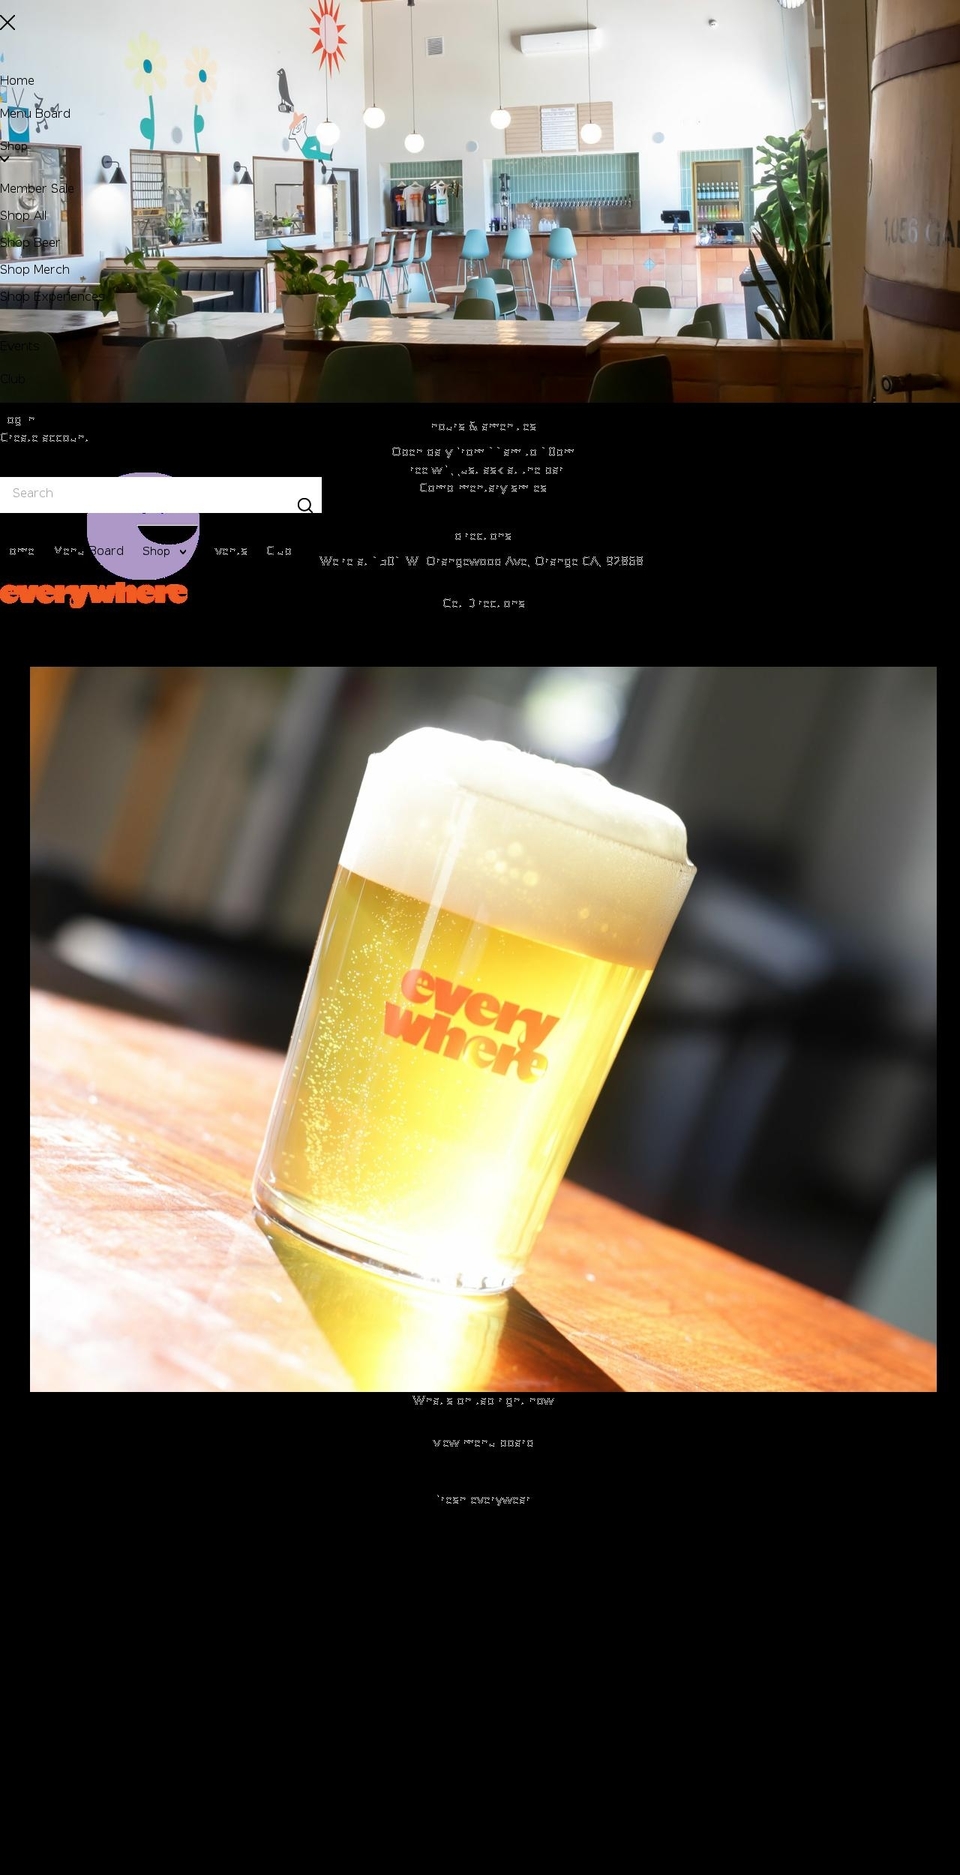 Shapes Shopify theme site example everywherebeer.com